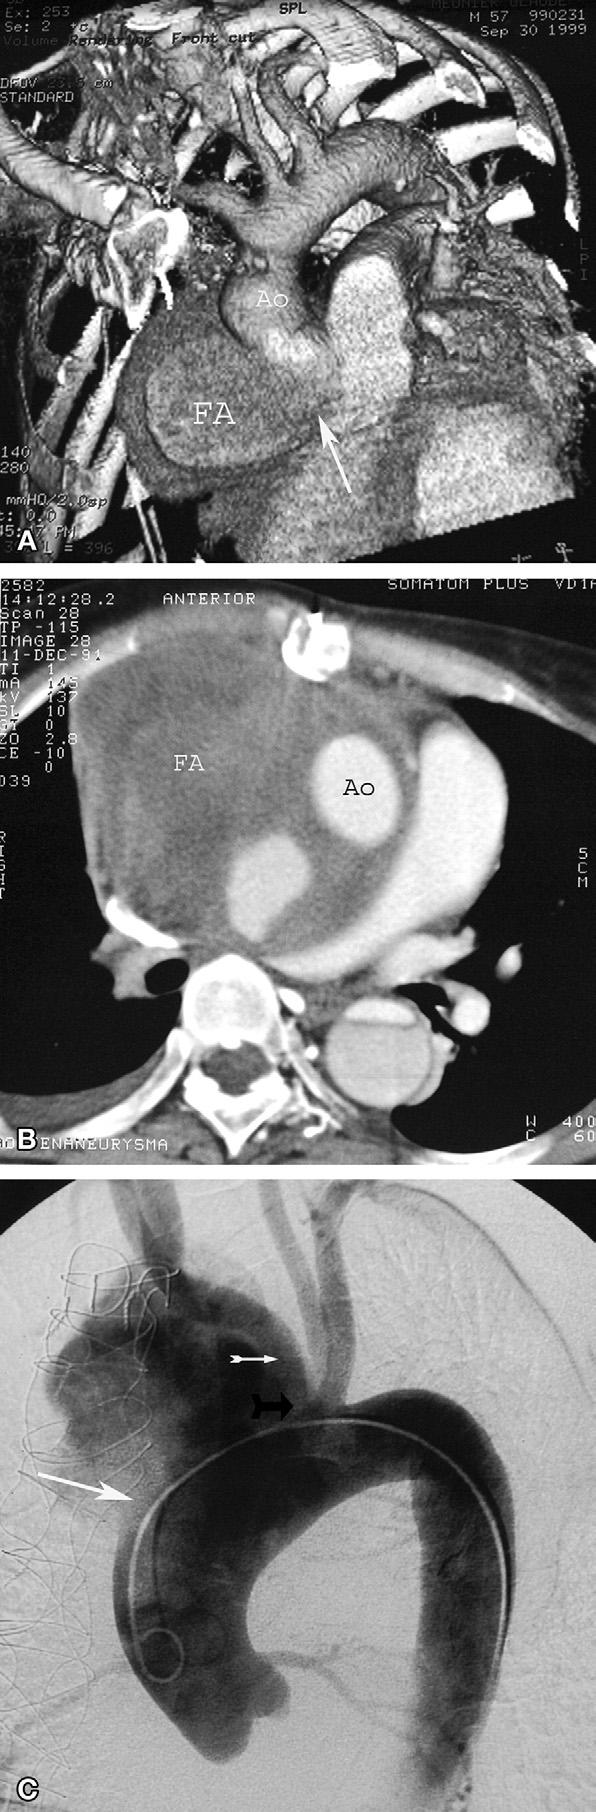 Ann Thorac Surg BACHET ET AL 2007;83:1610 4 GIANT FA OF THE THORACIC AORTA 1611 tive cerebral cold (10 C to 12 C) perfusion is initiated, while the circulation is discontinued in the main circuit.